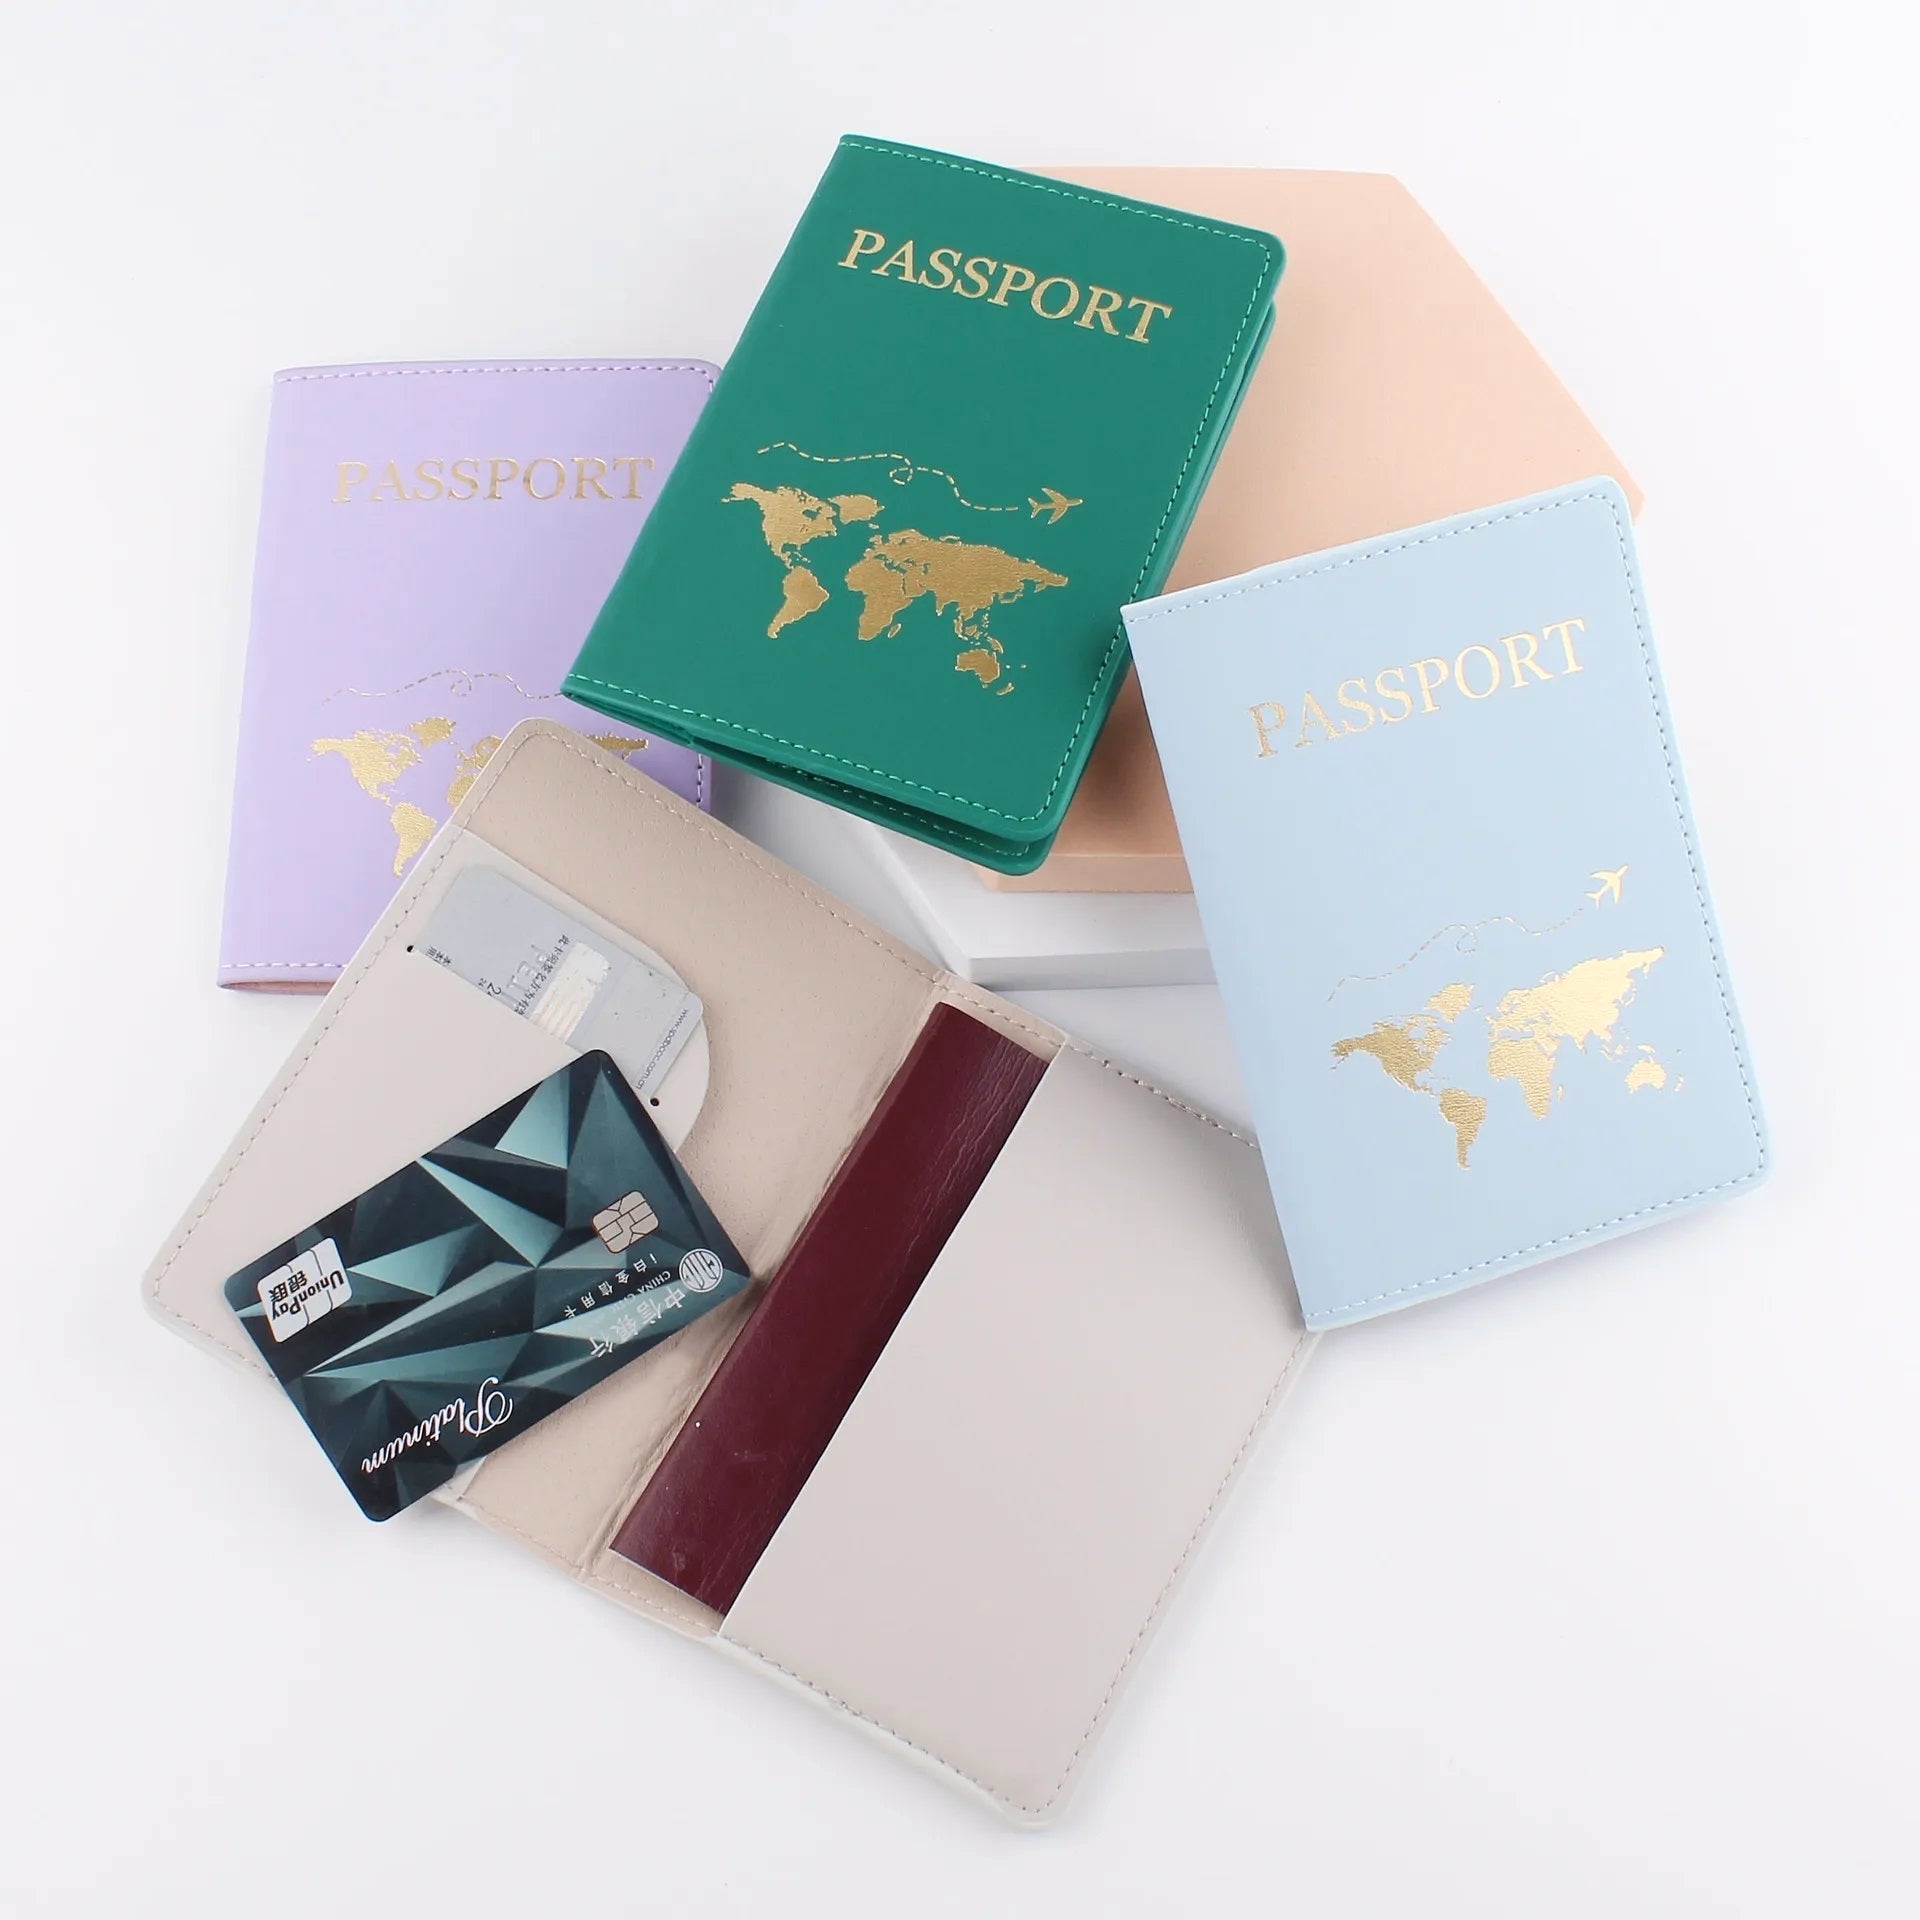 Green Gold foiled world map Aesthetic Pastel PU leather Passport